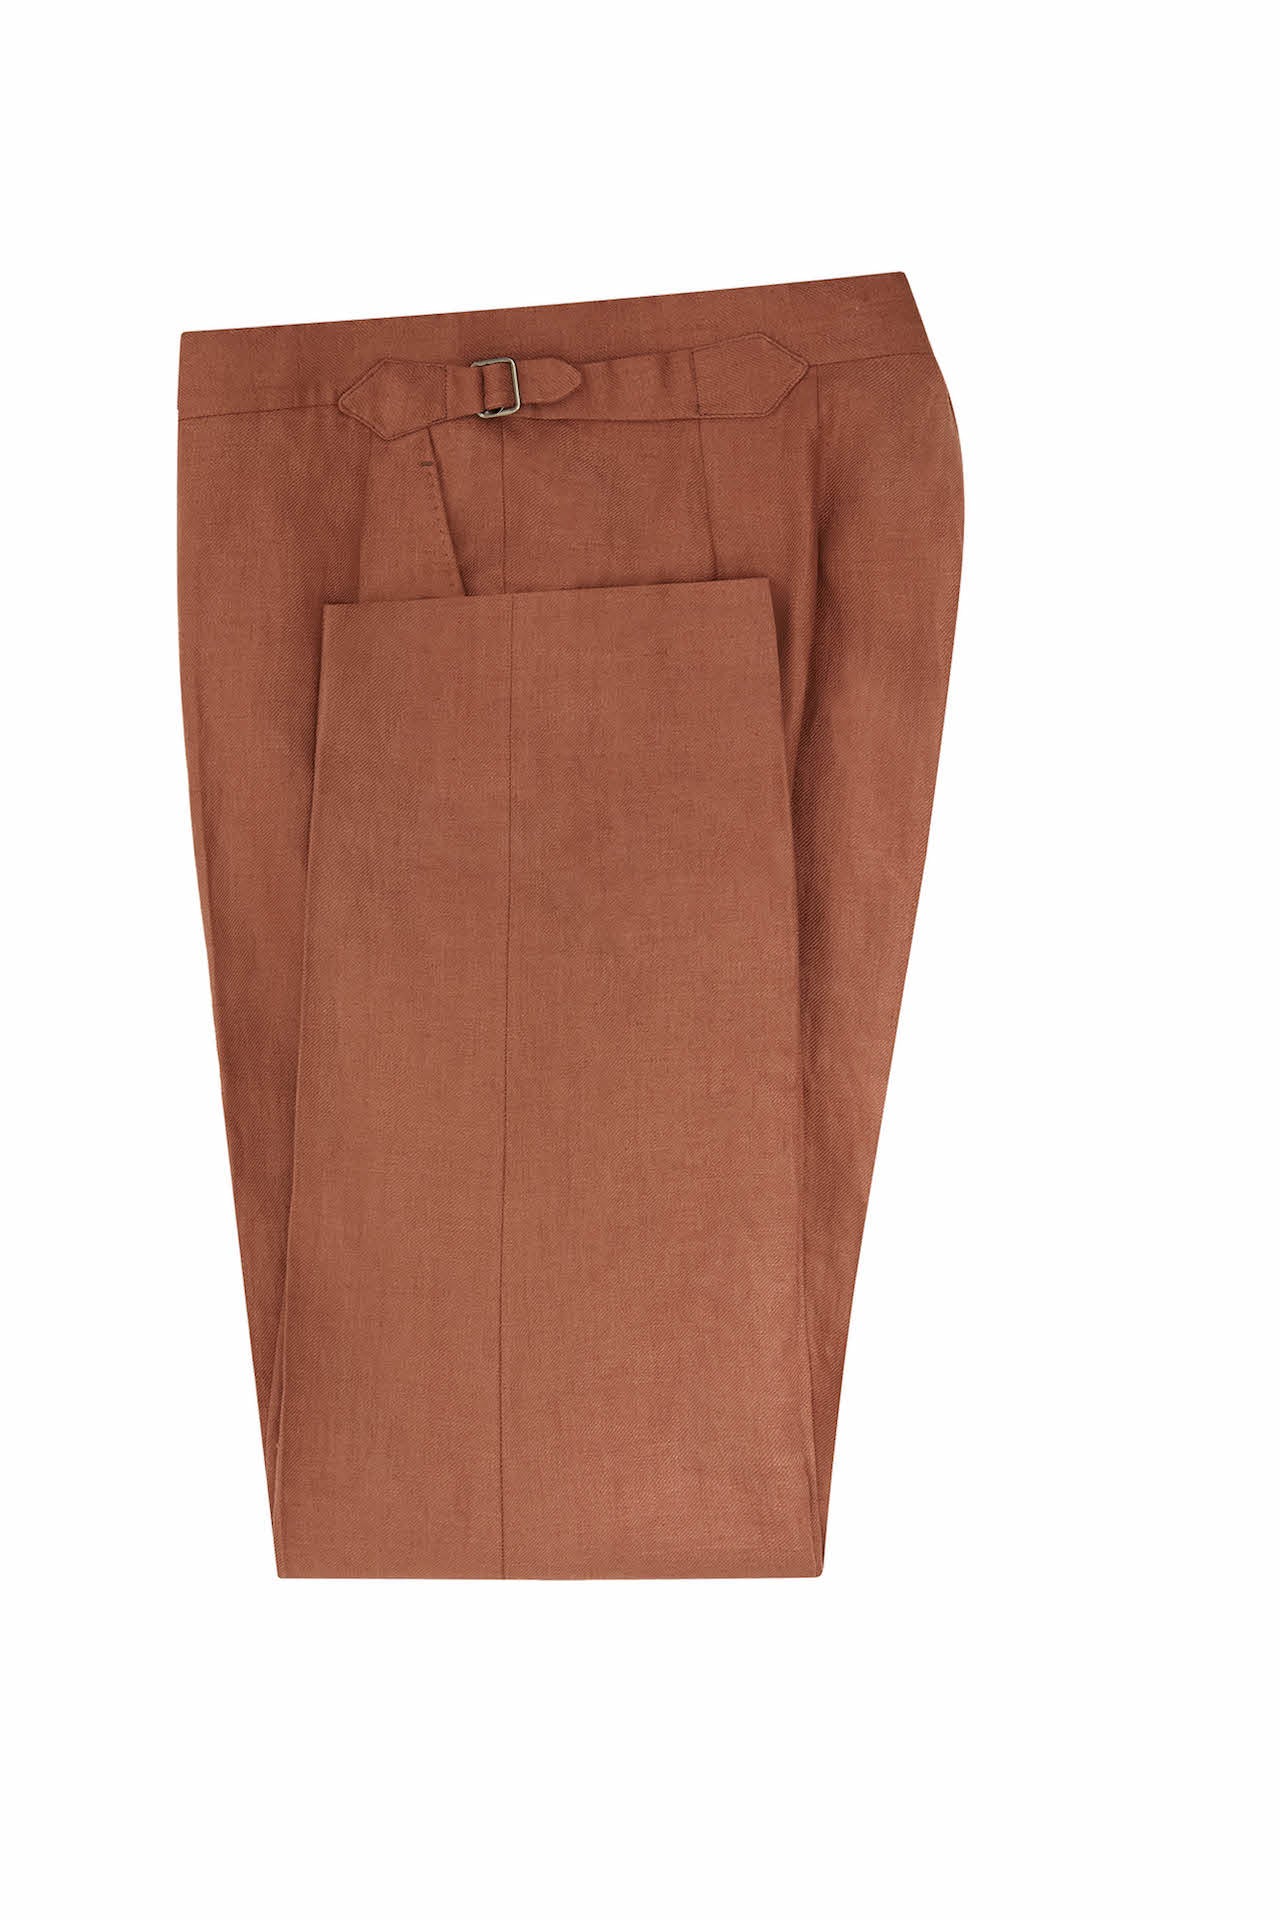 Bisque Linen Trousers